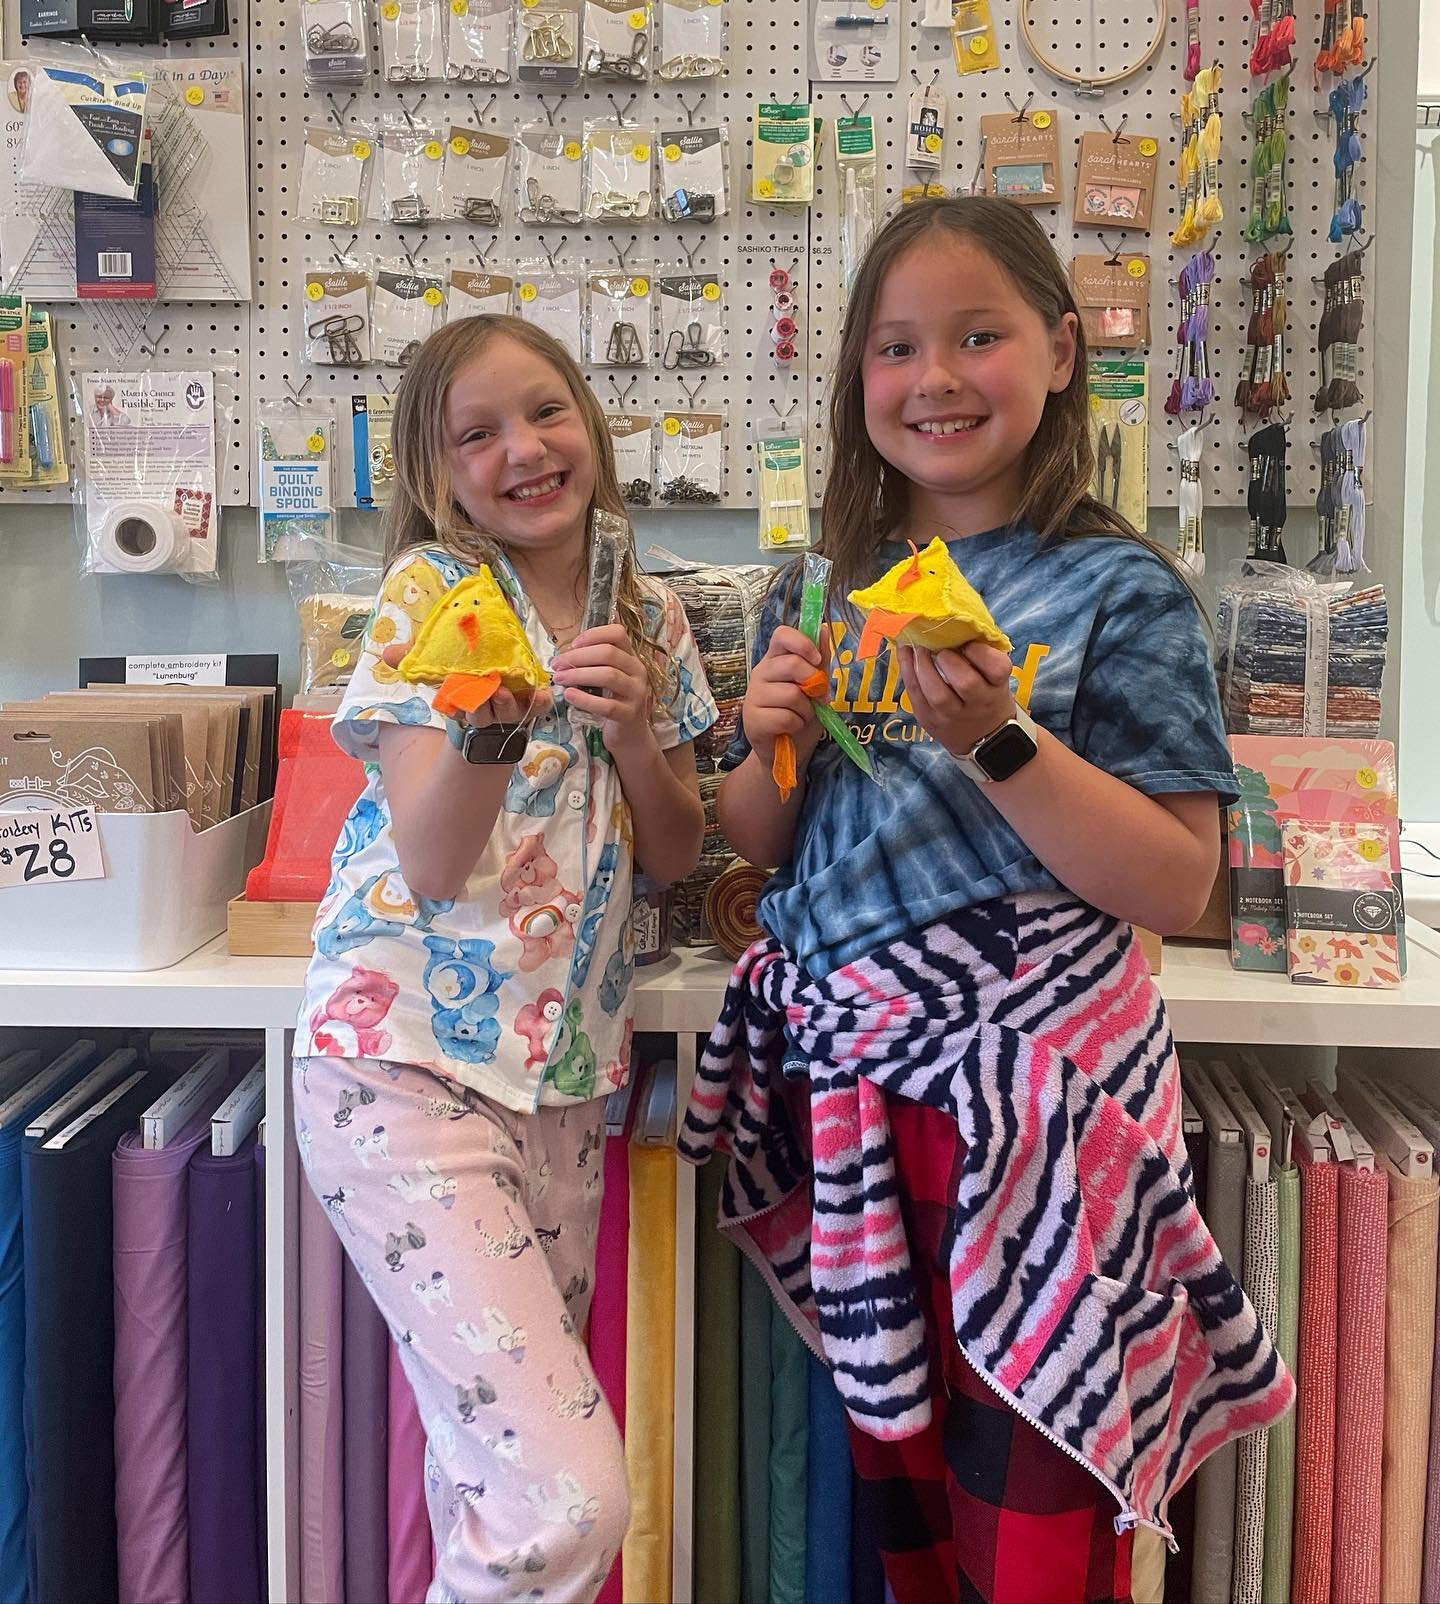 We have so many happy sewers here at Sew on Central!! Our students learn so much in our classes, we have so many projects for them throughout the session! 

Summer camps are starting up in a couple of weeks and we also have some mini camps in July! C